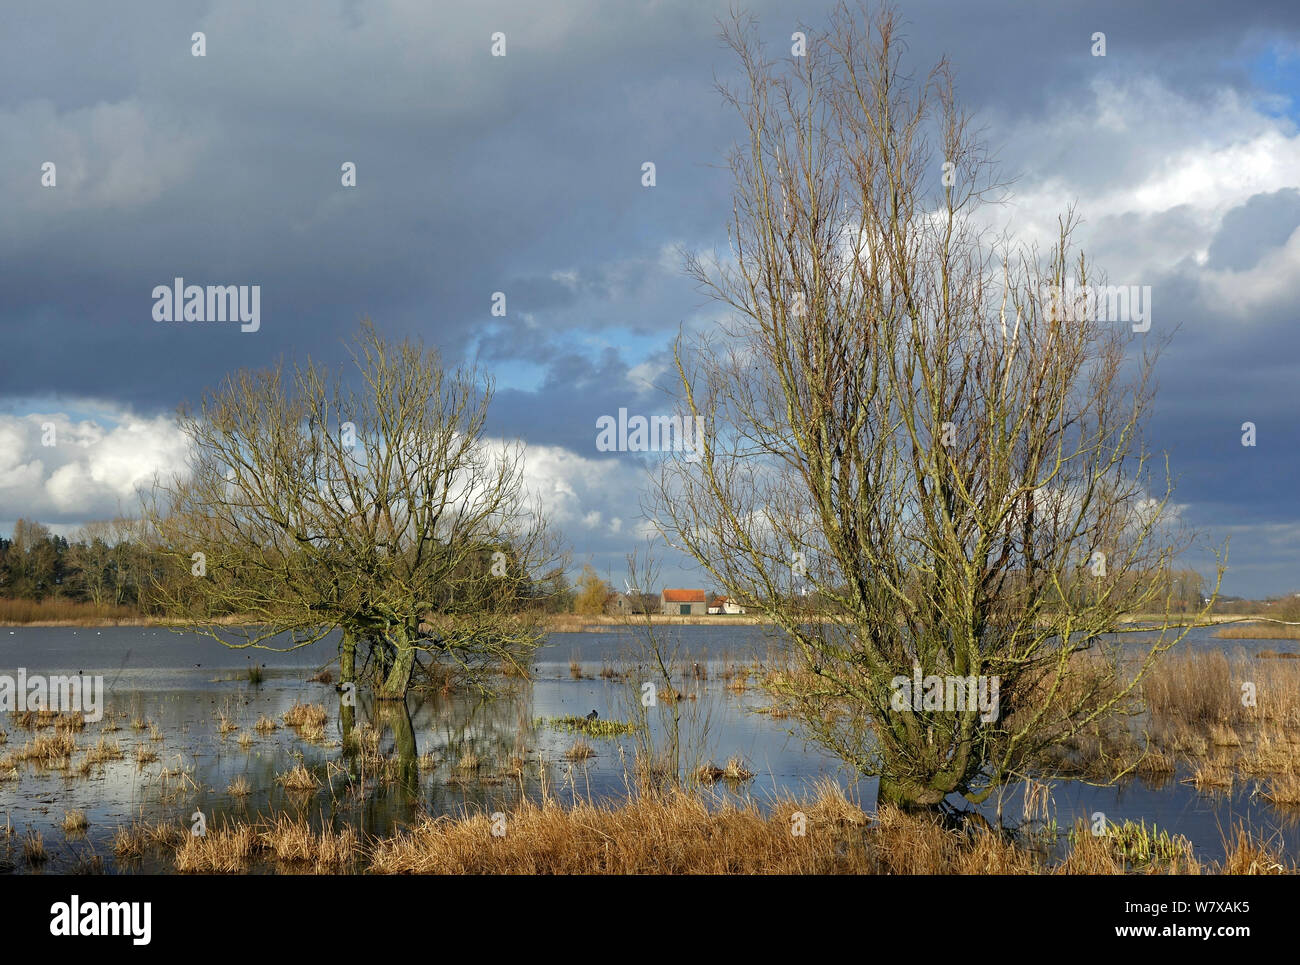 Willow trees (Salix sp) in flooded meadow in Bourgoyen Ossemeersen, a Belgian nature reserve and an internationally important wetland for wintering waterfowl. Near Ghent, Belgium, February 2014. Stock Photo